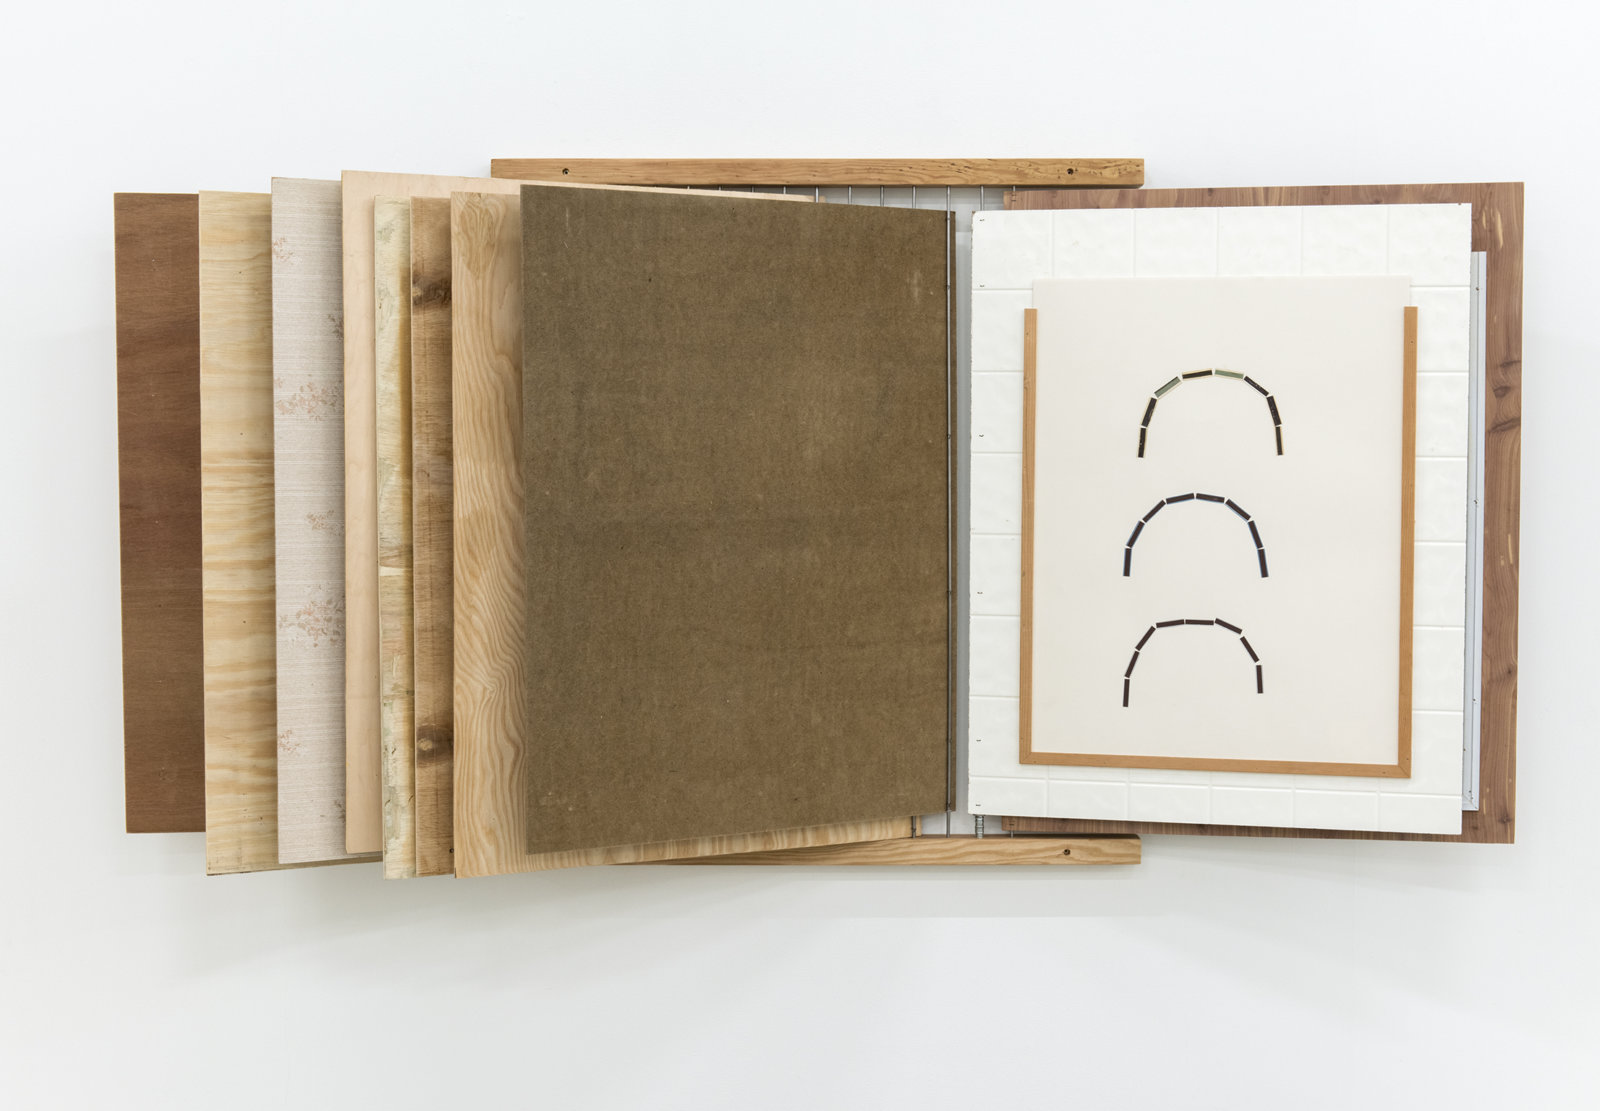 Ashes Withyman, Four bells, 2013, match strike pads on paper, 33 x 26 in. (83 x 66 cm)